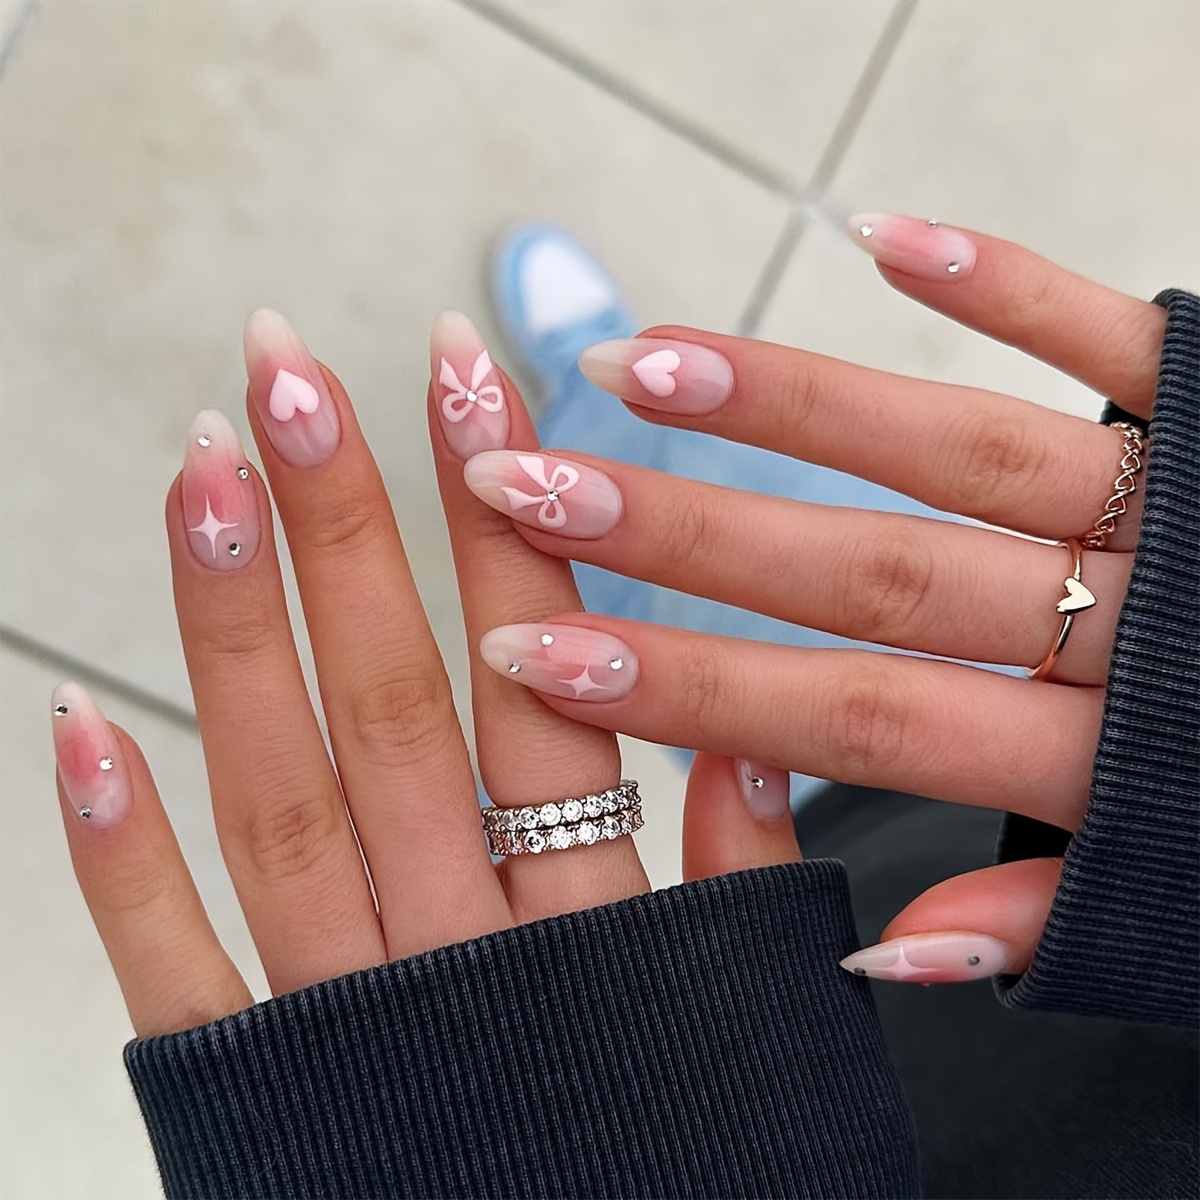 

Handmade Sweet Pinkish Gradient Press On Nails, Glossy Medium Almond Blush Fake Nails, Love, Bow And Rhinestone With Design Sweet Acrylic Artificial Nails For Women Girls